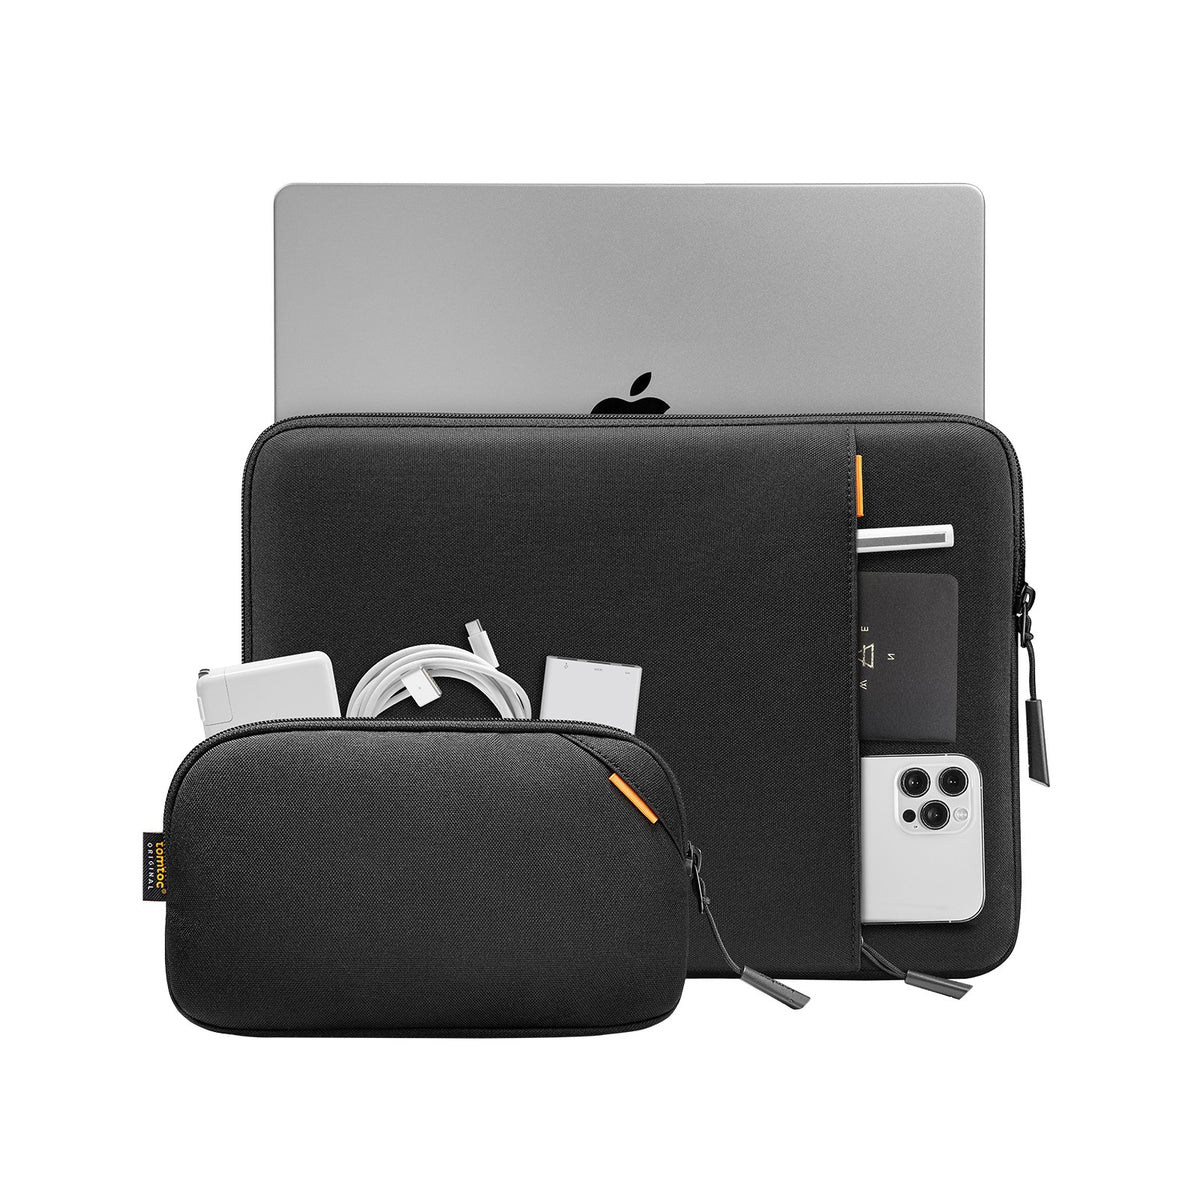 secondary_Defender-A13 Laptop Sleeve Kit For 14-inch New MacBook Pro